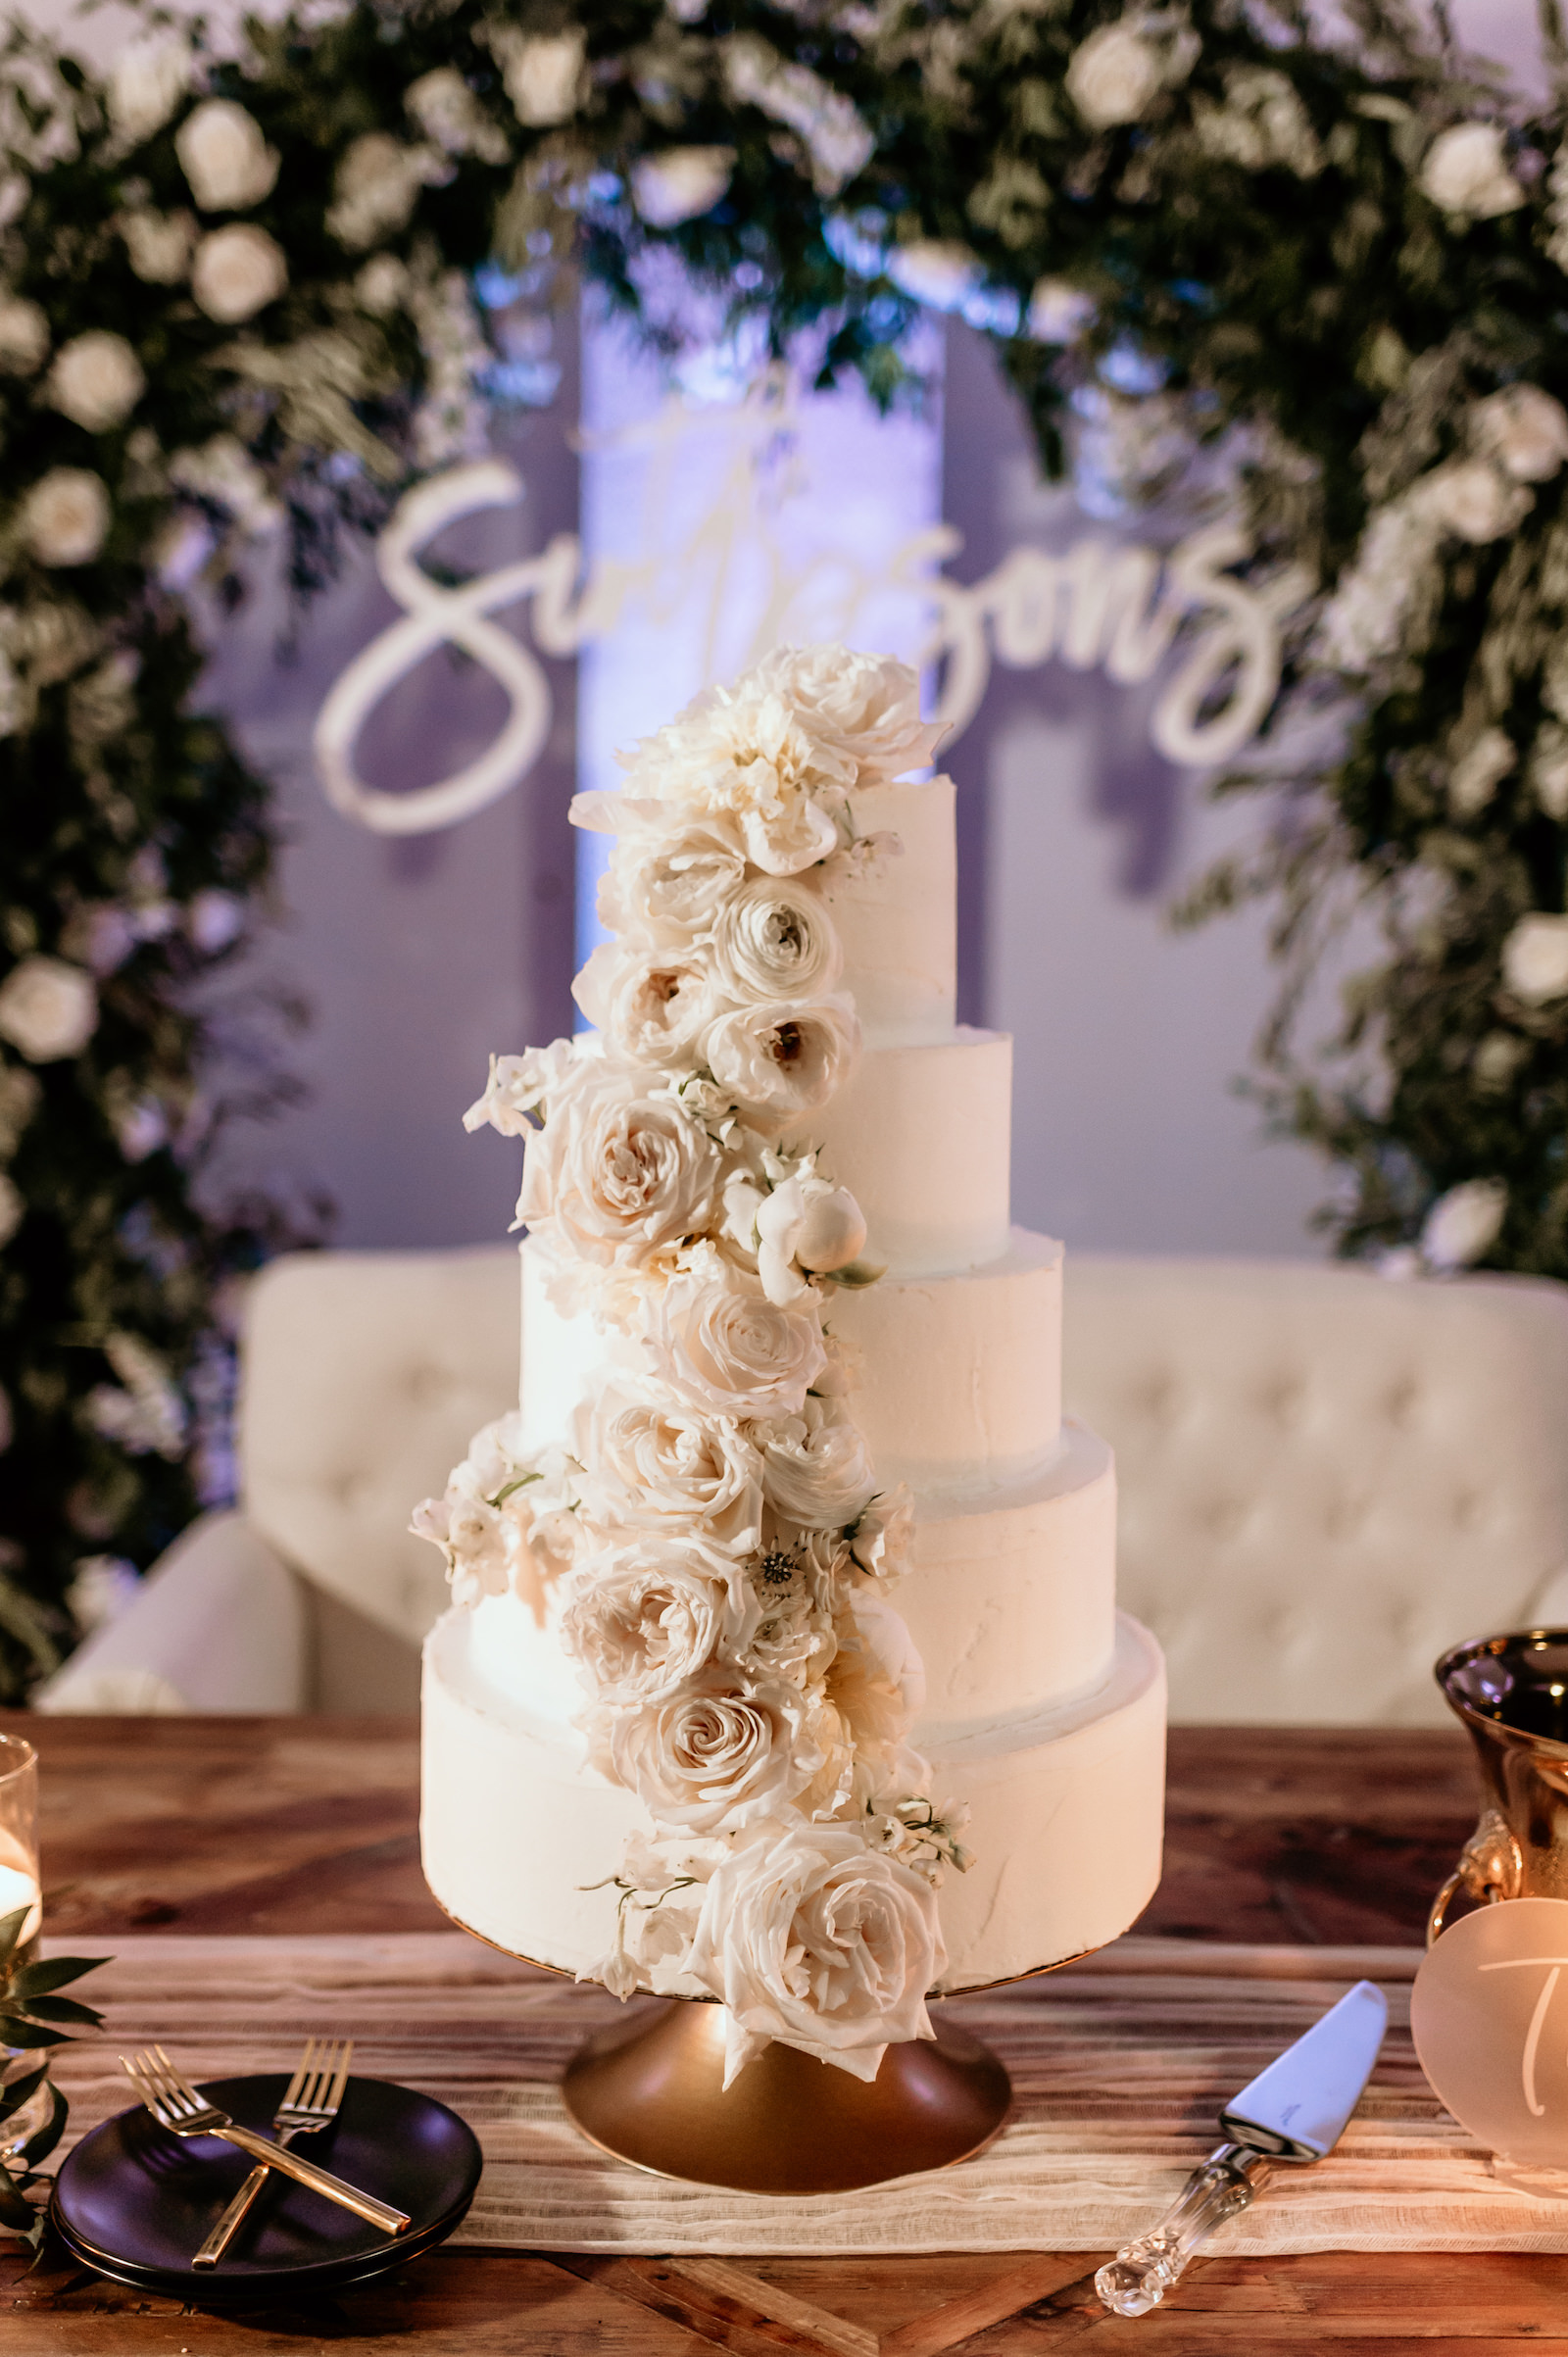 Five Tier White Classic Wedding Cake with Cascading White Flowers on Wooden Sweetheart Table, Lush White Roses and Greenery Floral Arch